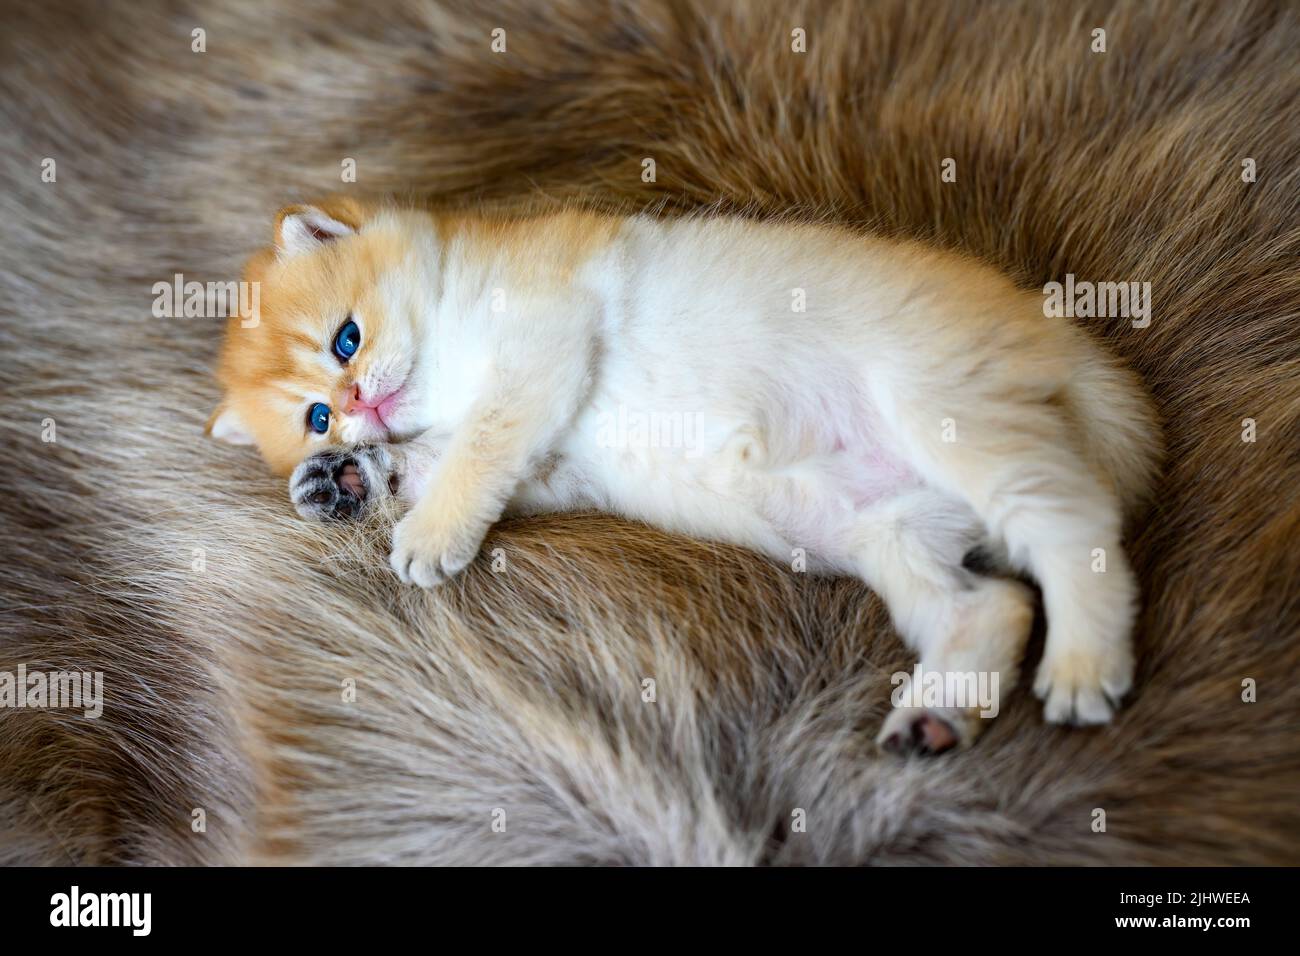 A kitten lying on a brown fur rug is posing on its side. British Short Hair Golden Hair His innocent face was sleepy, his eyes drooping, his expressio Stock Photo